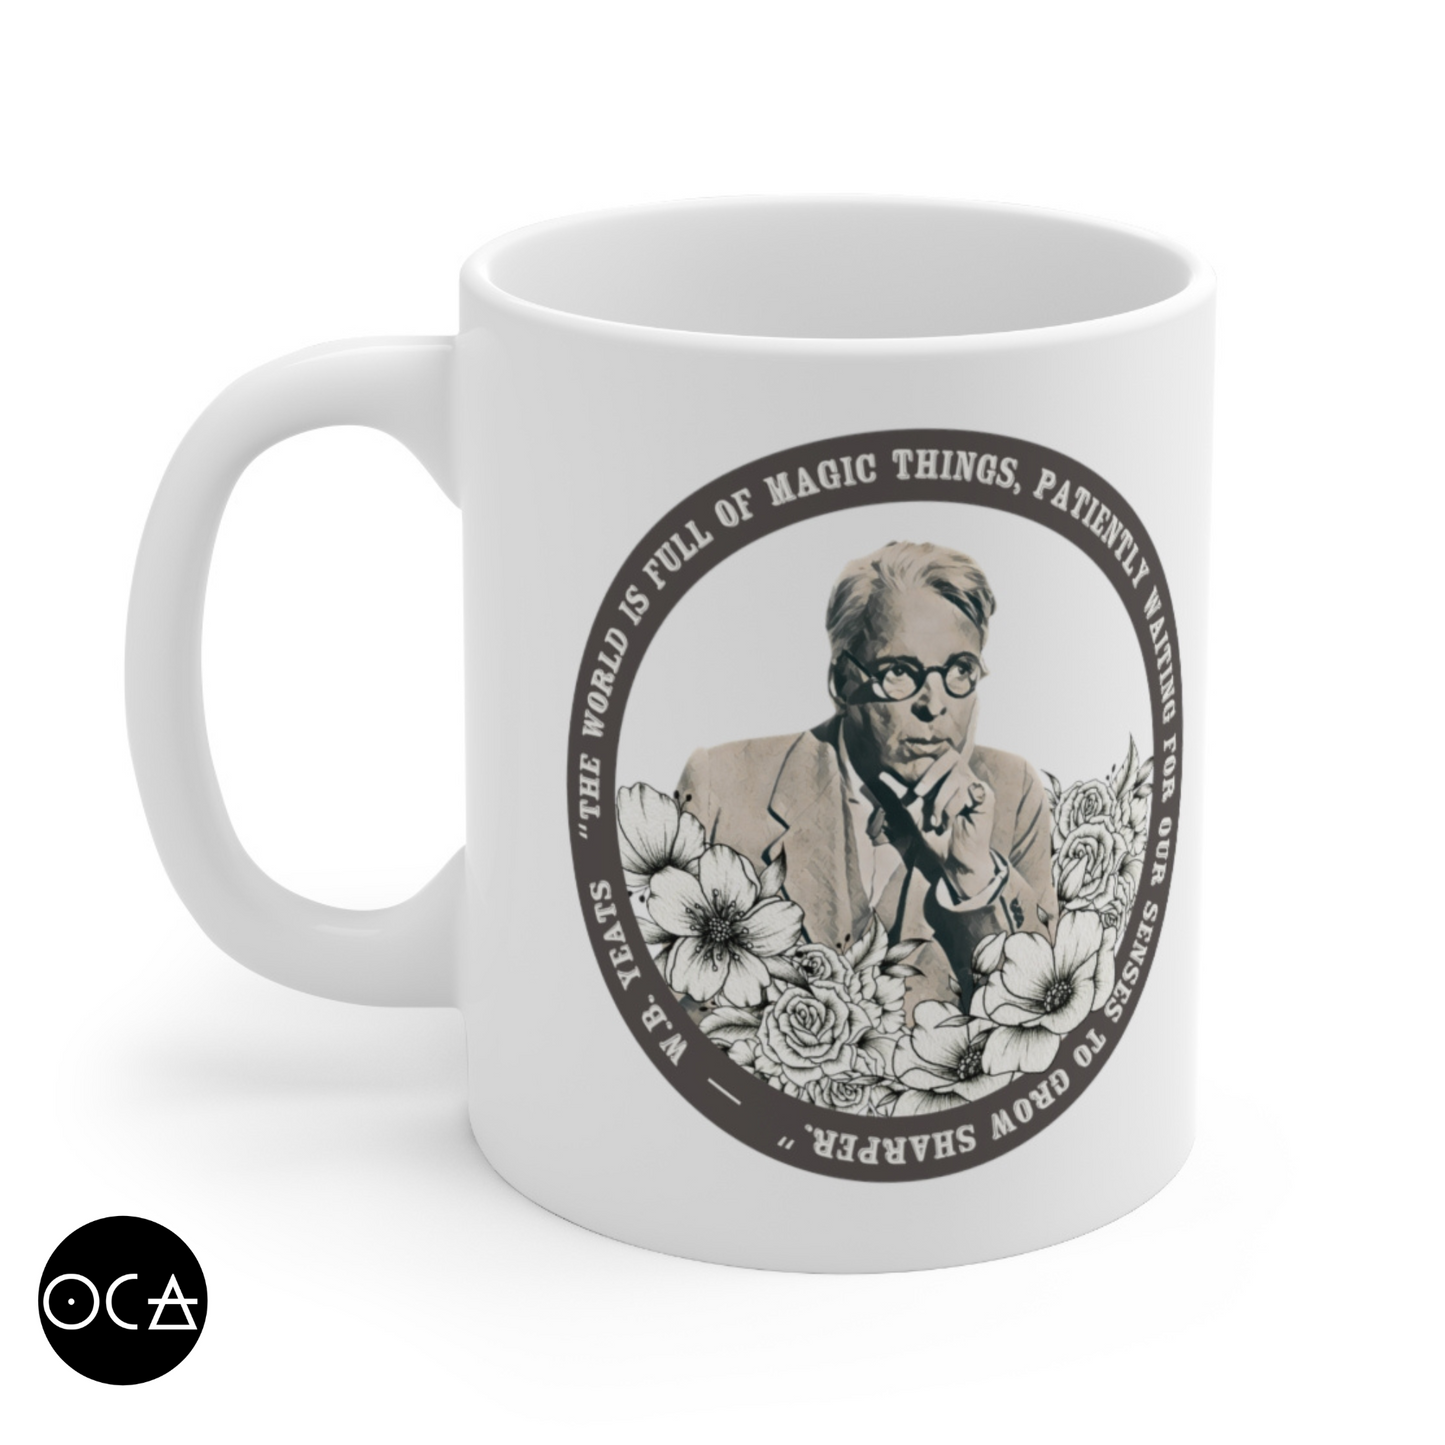 William Butler Yeats Mug (Doublesided/2 Color Options) Herbteller Lucky Mugs | Gifts for Writers, Readers, Tellers, and Taleswappers